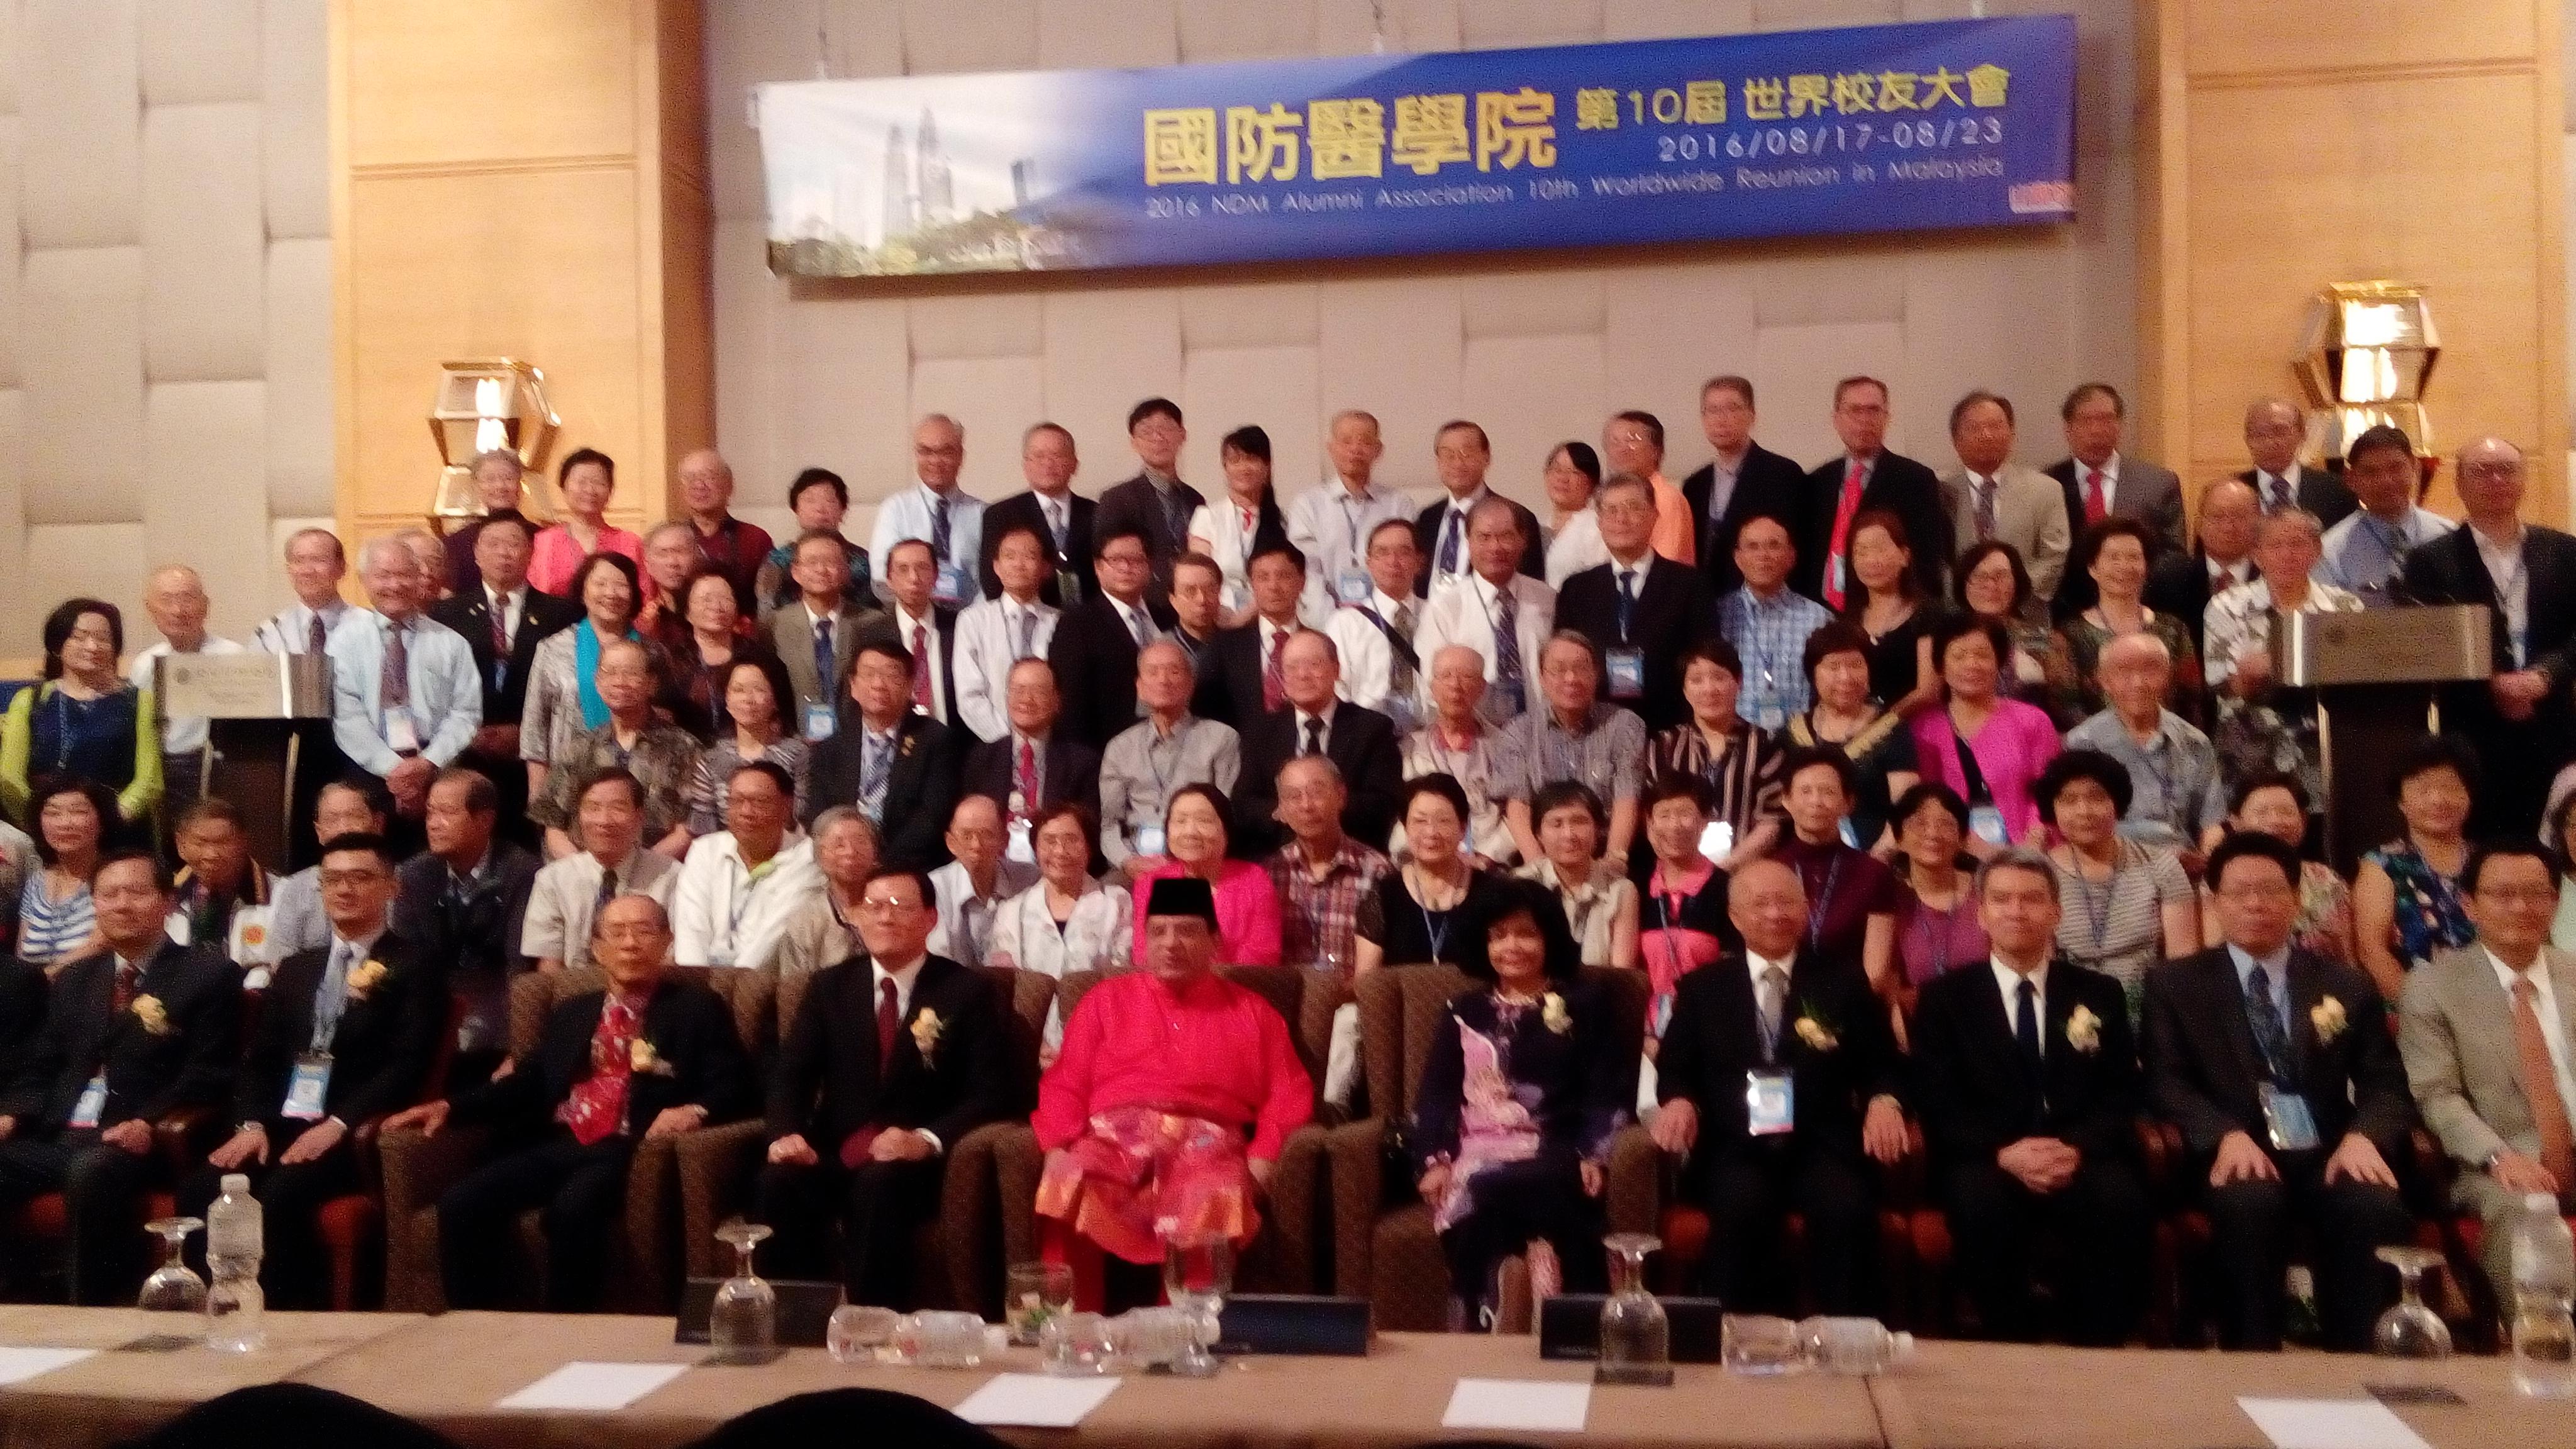 21 AUGUST 2016 Representative and Head of Mission James Chang Chi-ping participate National Defence Medical Centre (NDMC) 10th Worldwide Reunion，along with other distinguished guest photo.